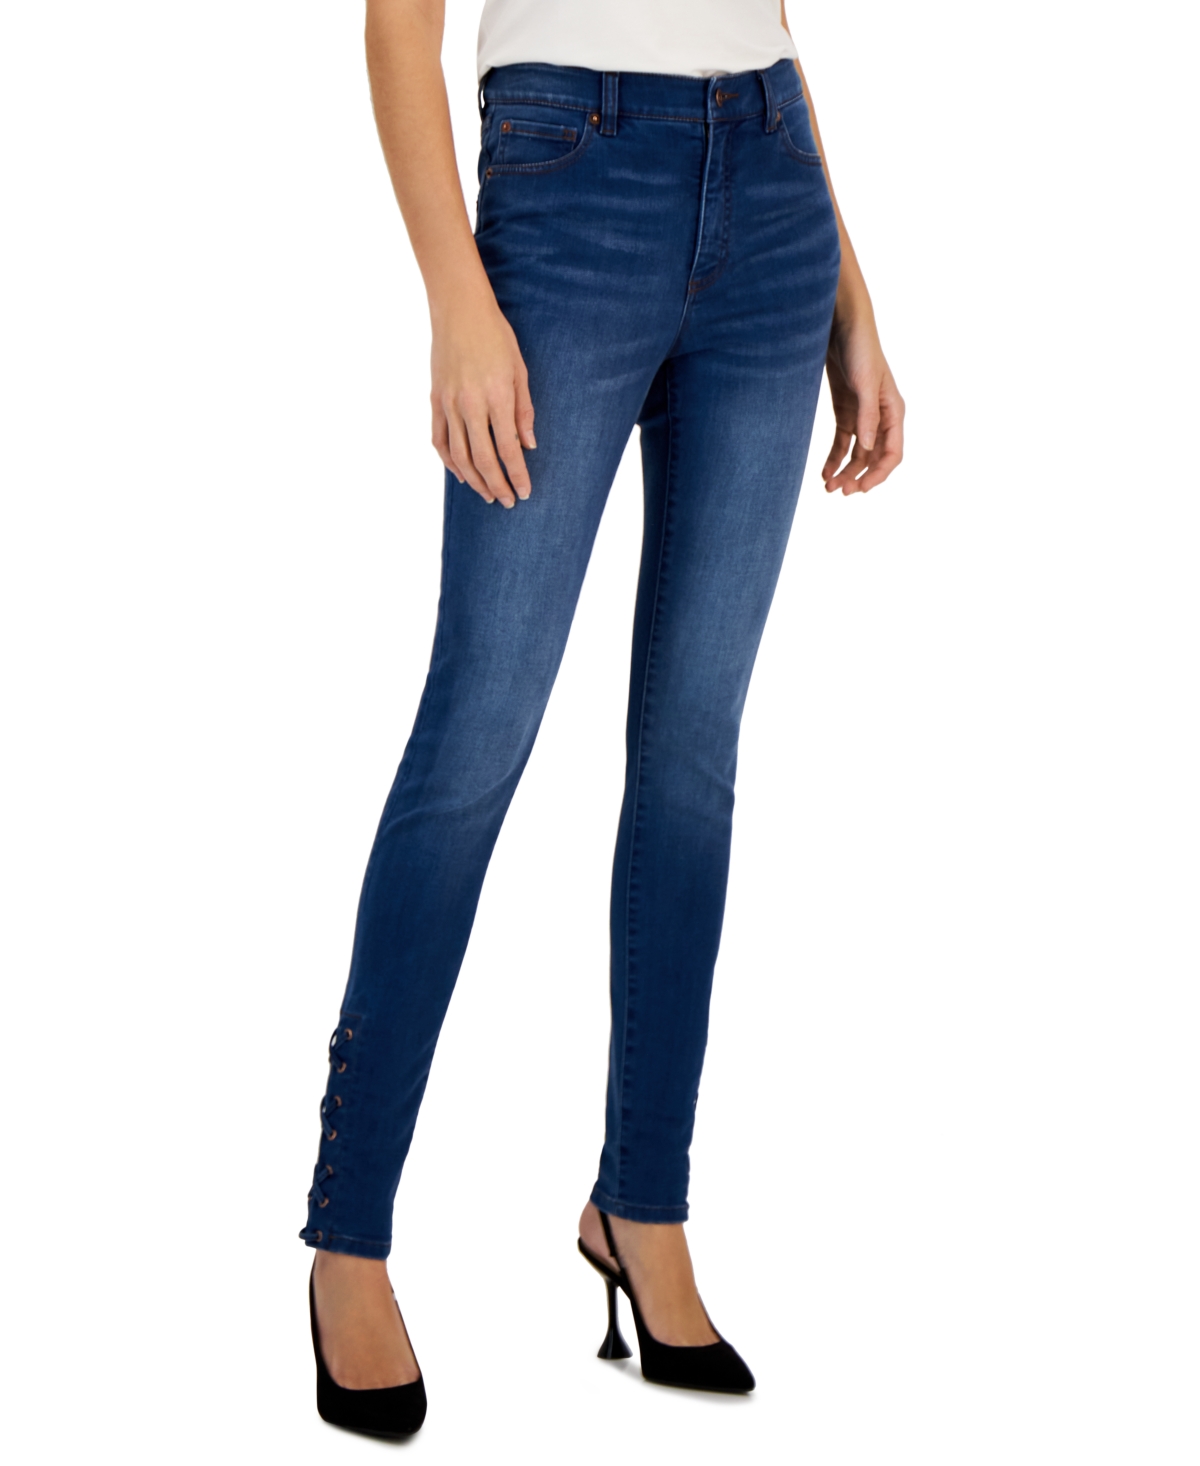  Inc International Concepts Women's High-Rise Lace-Up Hem Skinny Jeans, Created for Macy's